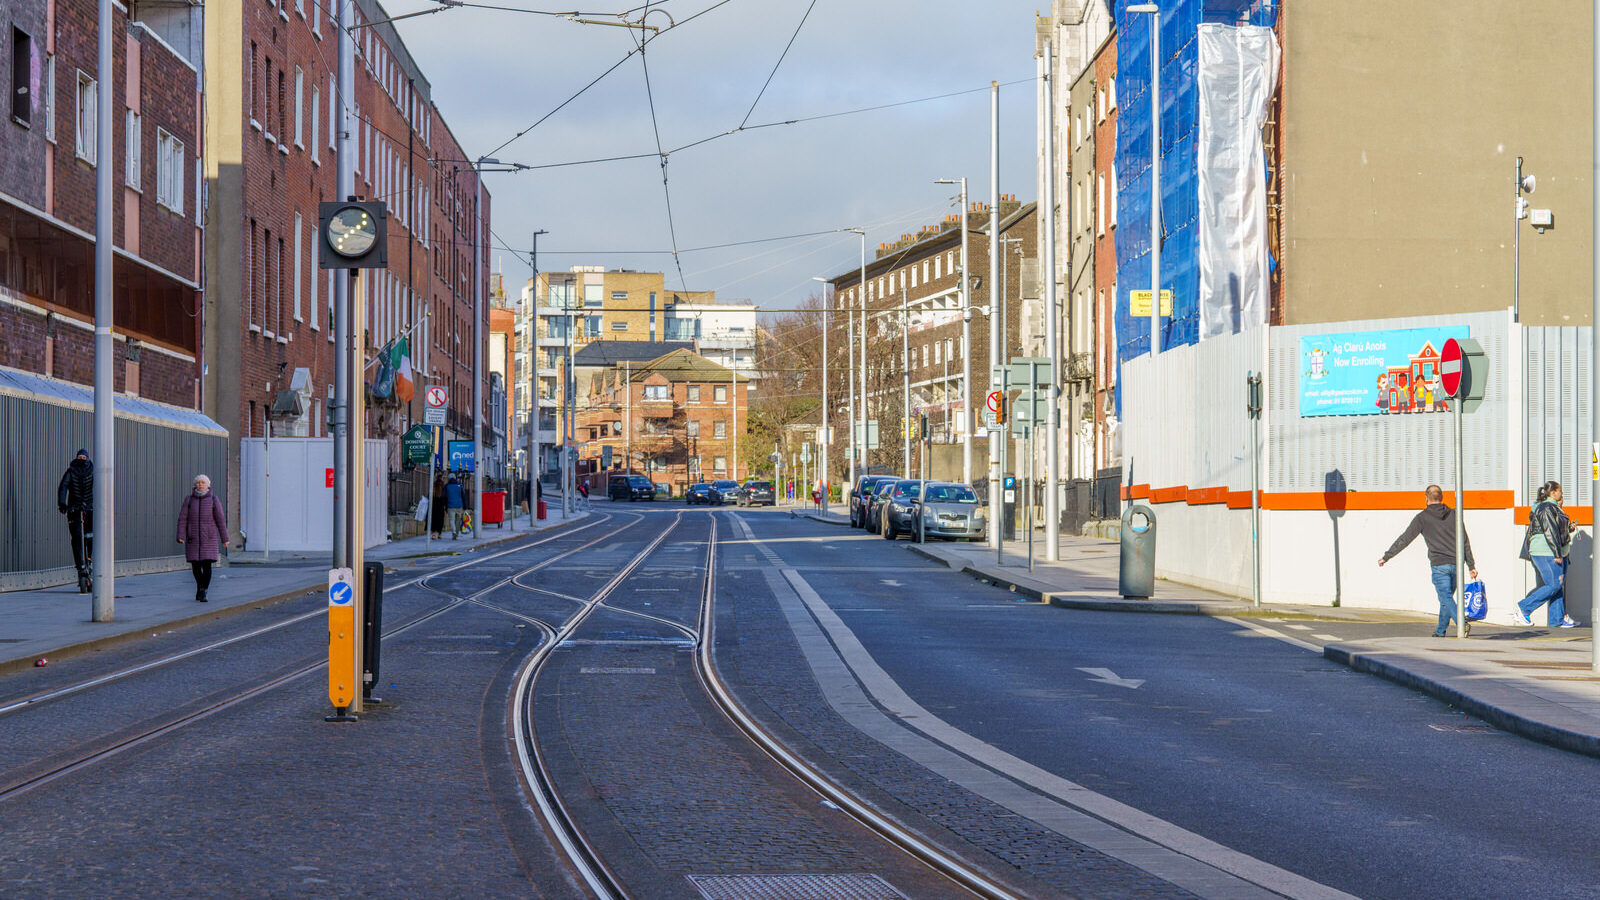 LUAS TRAM STOP AT LOWER DOMINICK STREET [AT THE MOMENT THE AREA DOES FEEL SAFER]-228692-1